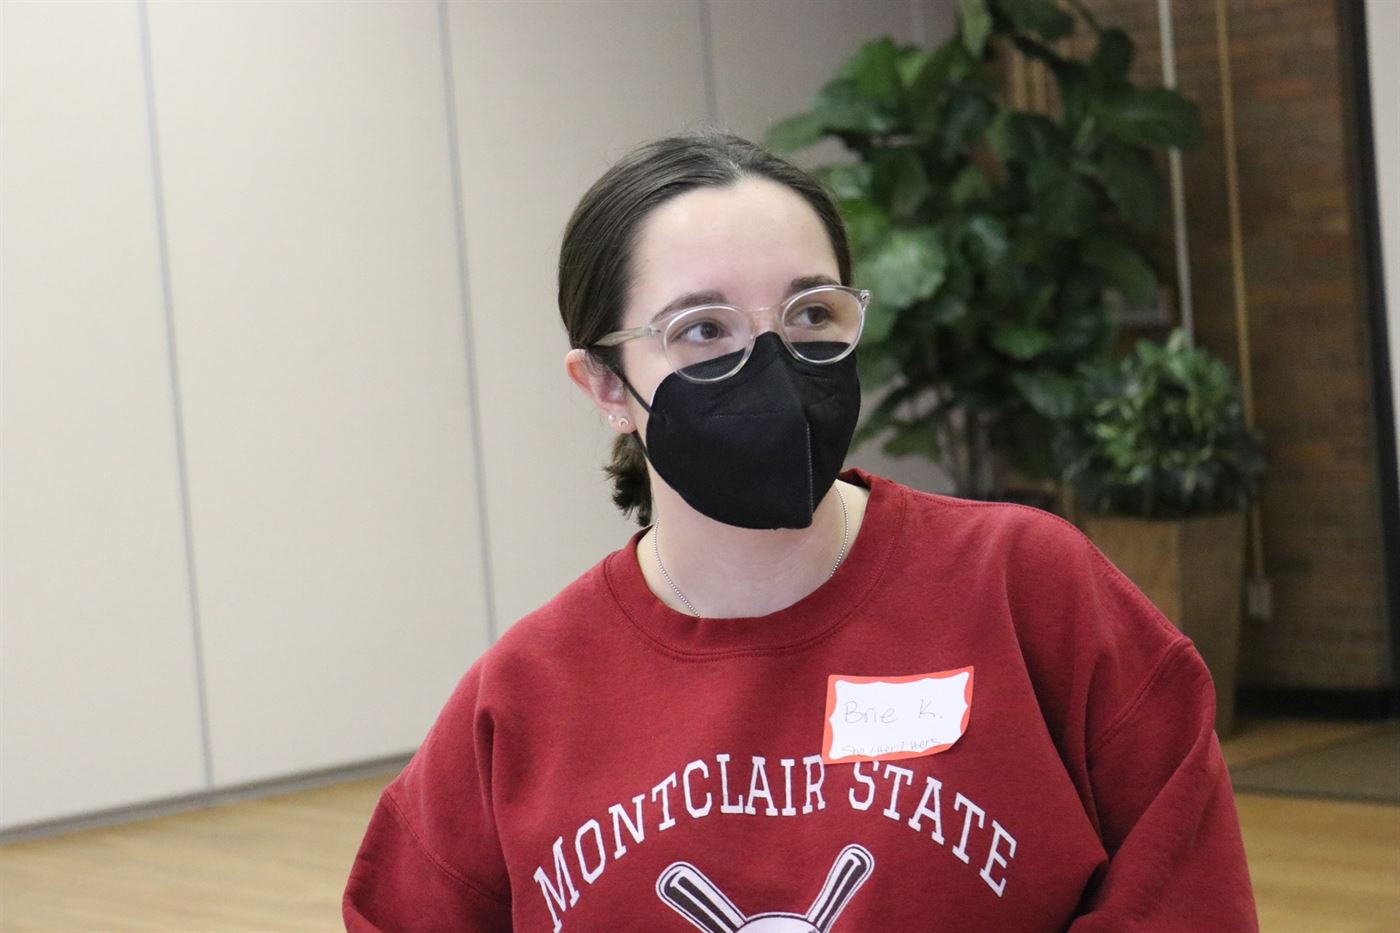 Brie Krug, the coordinator of evening events and facilities at the Student Recreation Center, shared how the Safe Space training could be applied to her job. Nicole Comly | The Montclarion